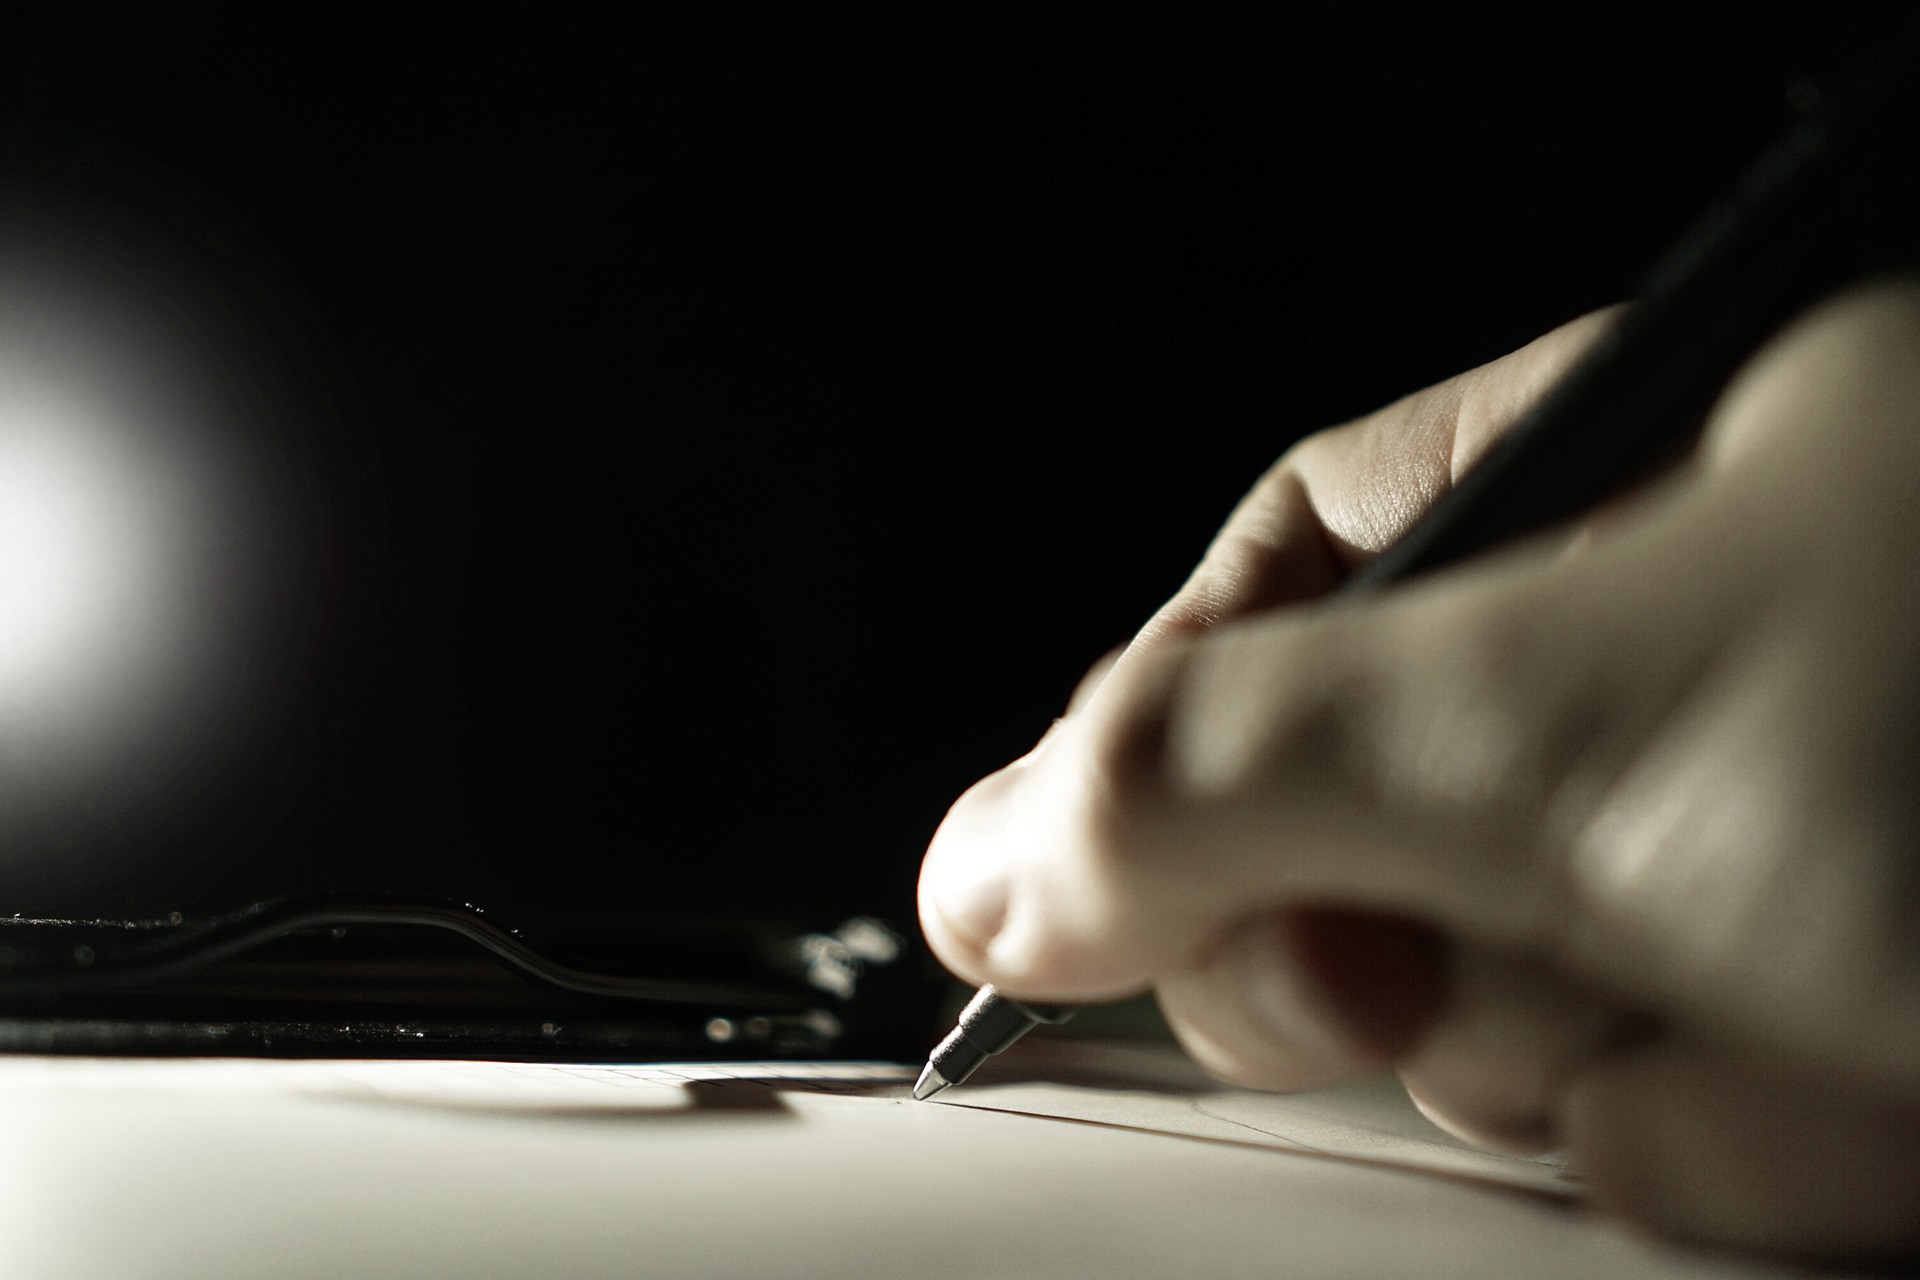 A hand is writing on an illuminated piece of paper